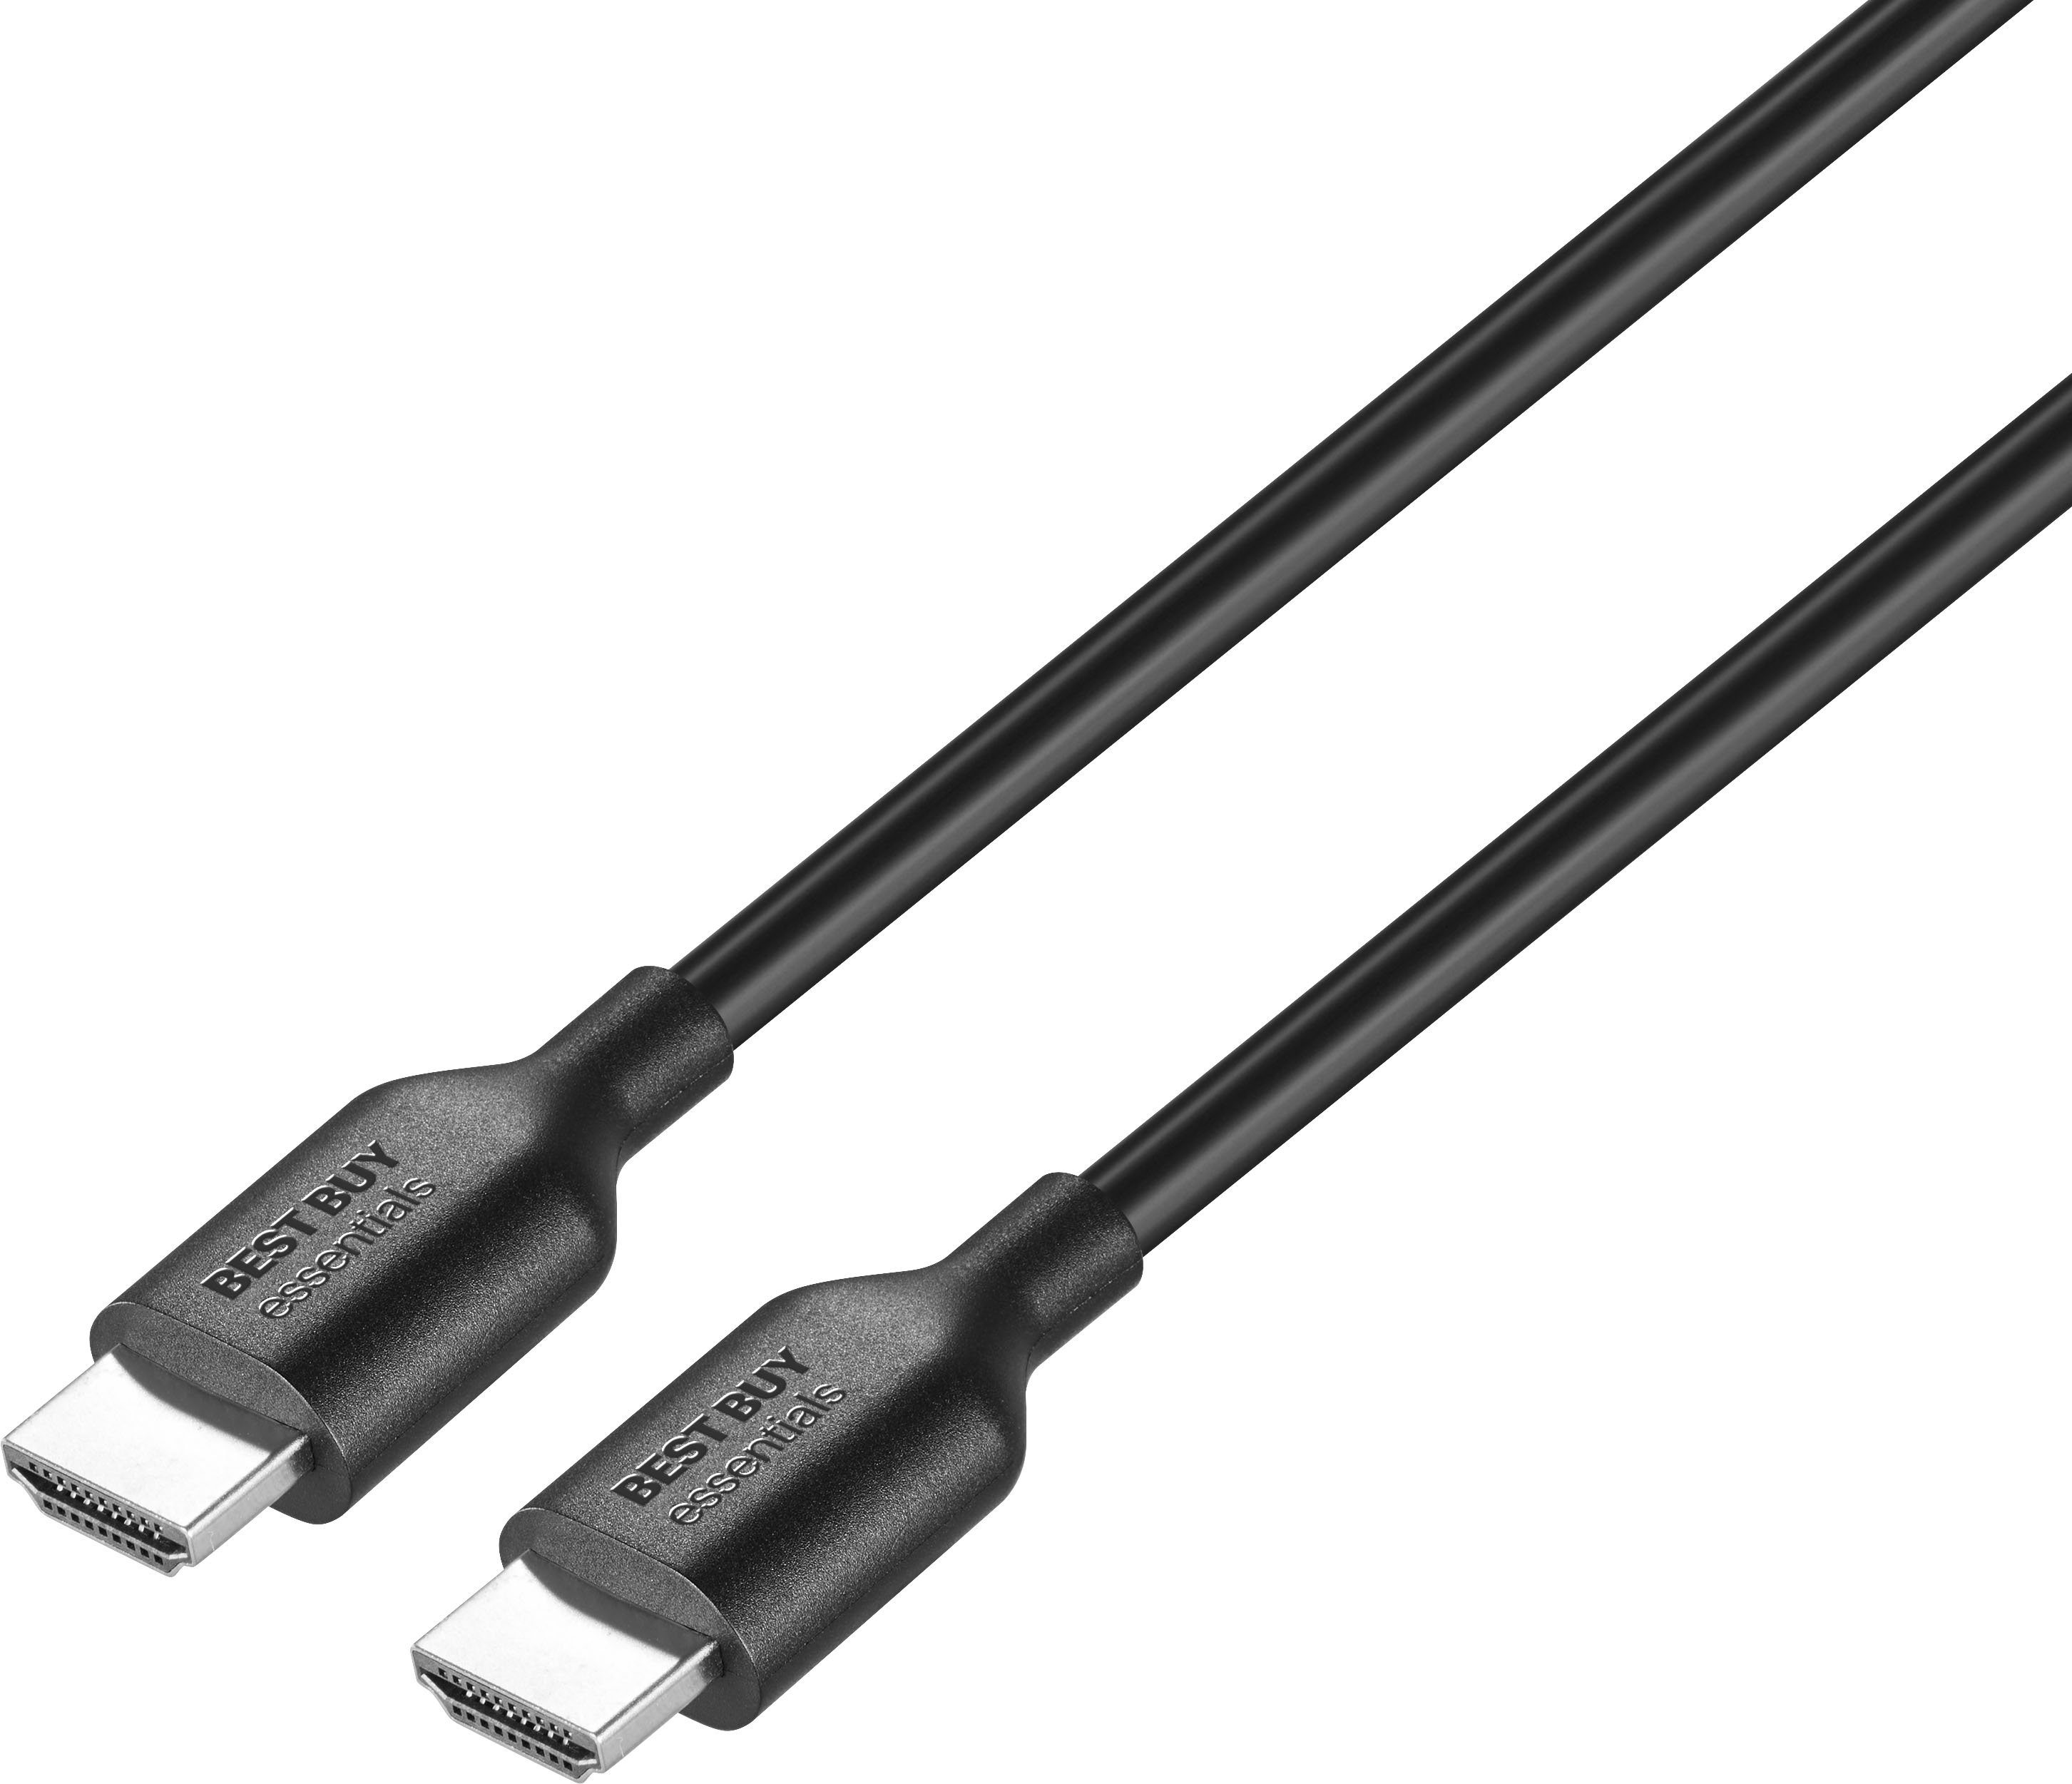 3ft 4K High Speed HDMI Cable - HDMI 1.4 - HDMI® Cables & HDMI